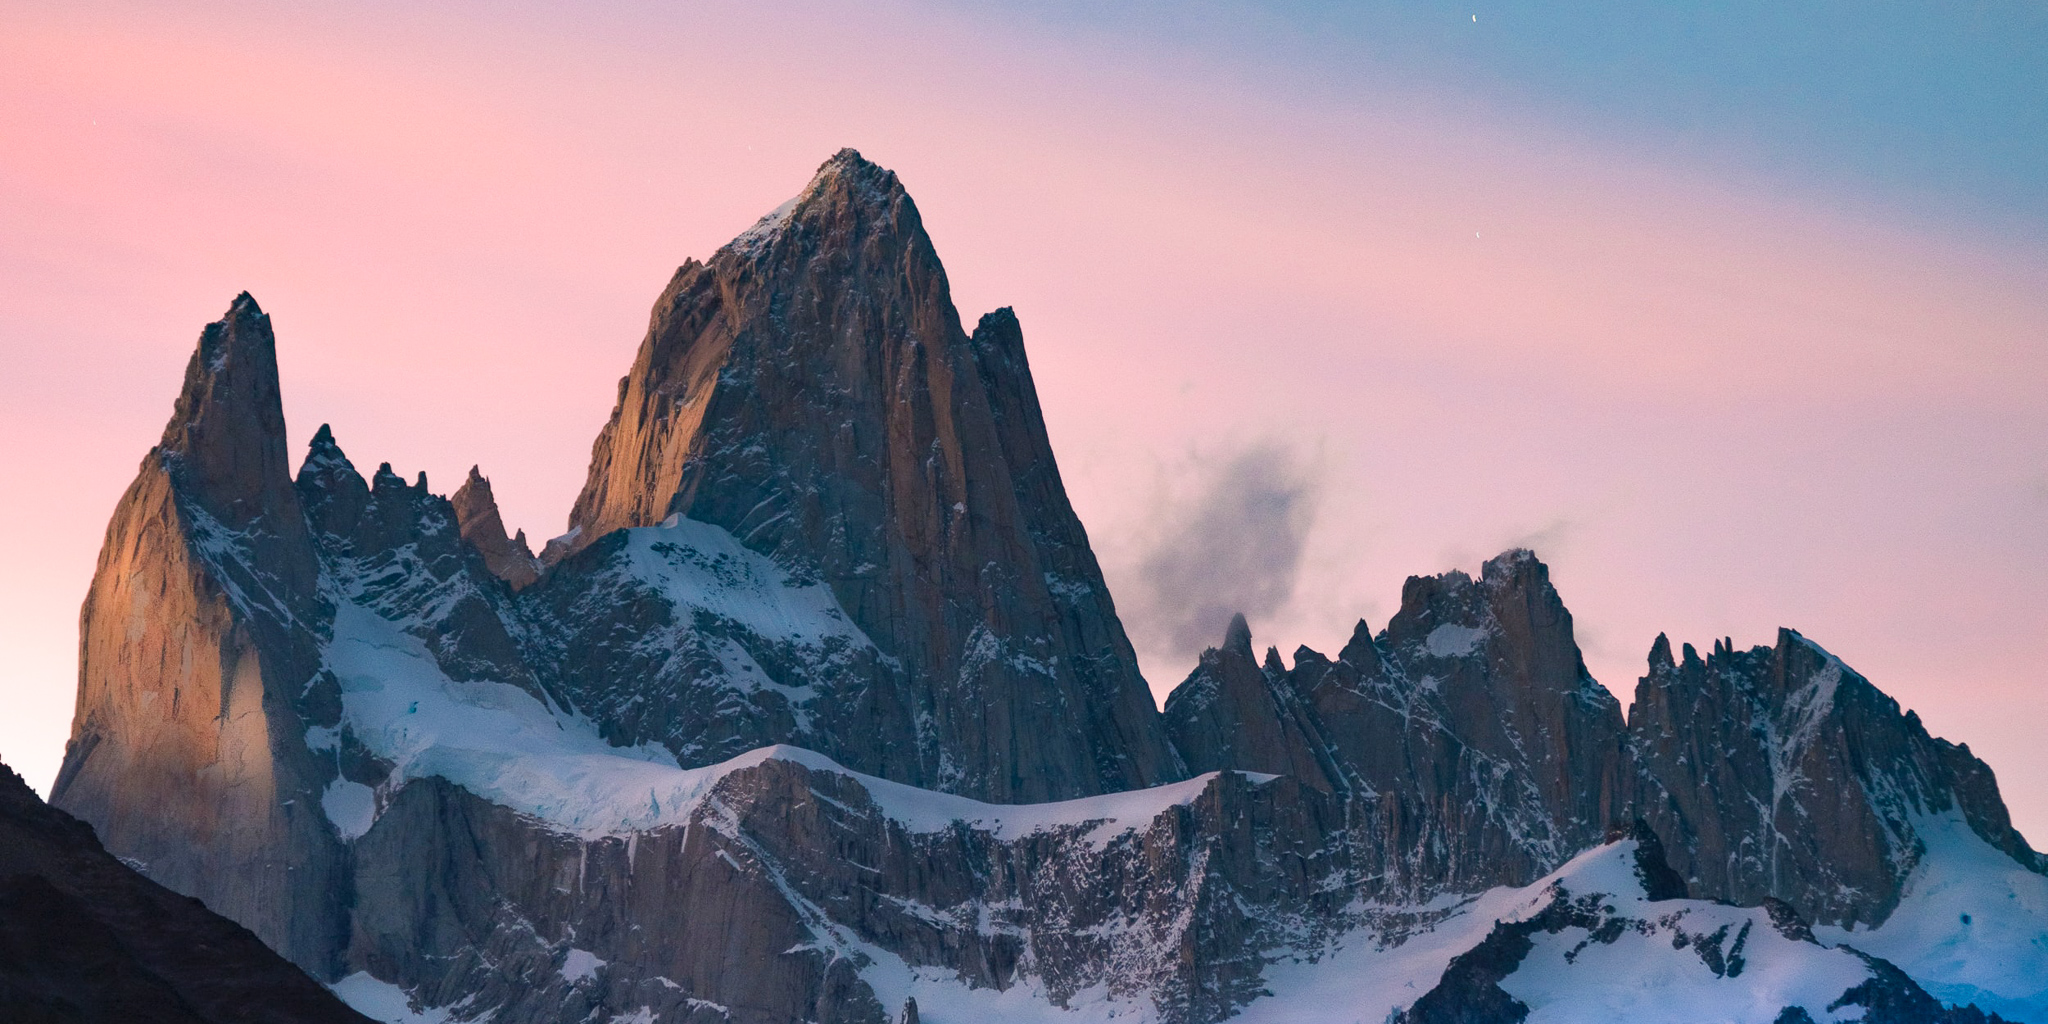 TrovaTrip: How to Prepare For a Hike up Mount Fitz Roy, Patagonia